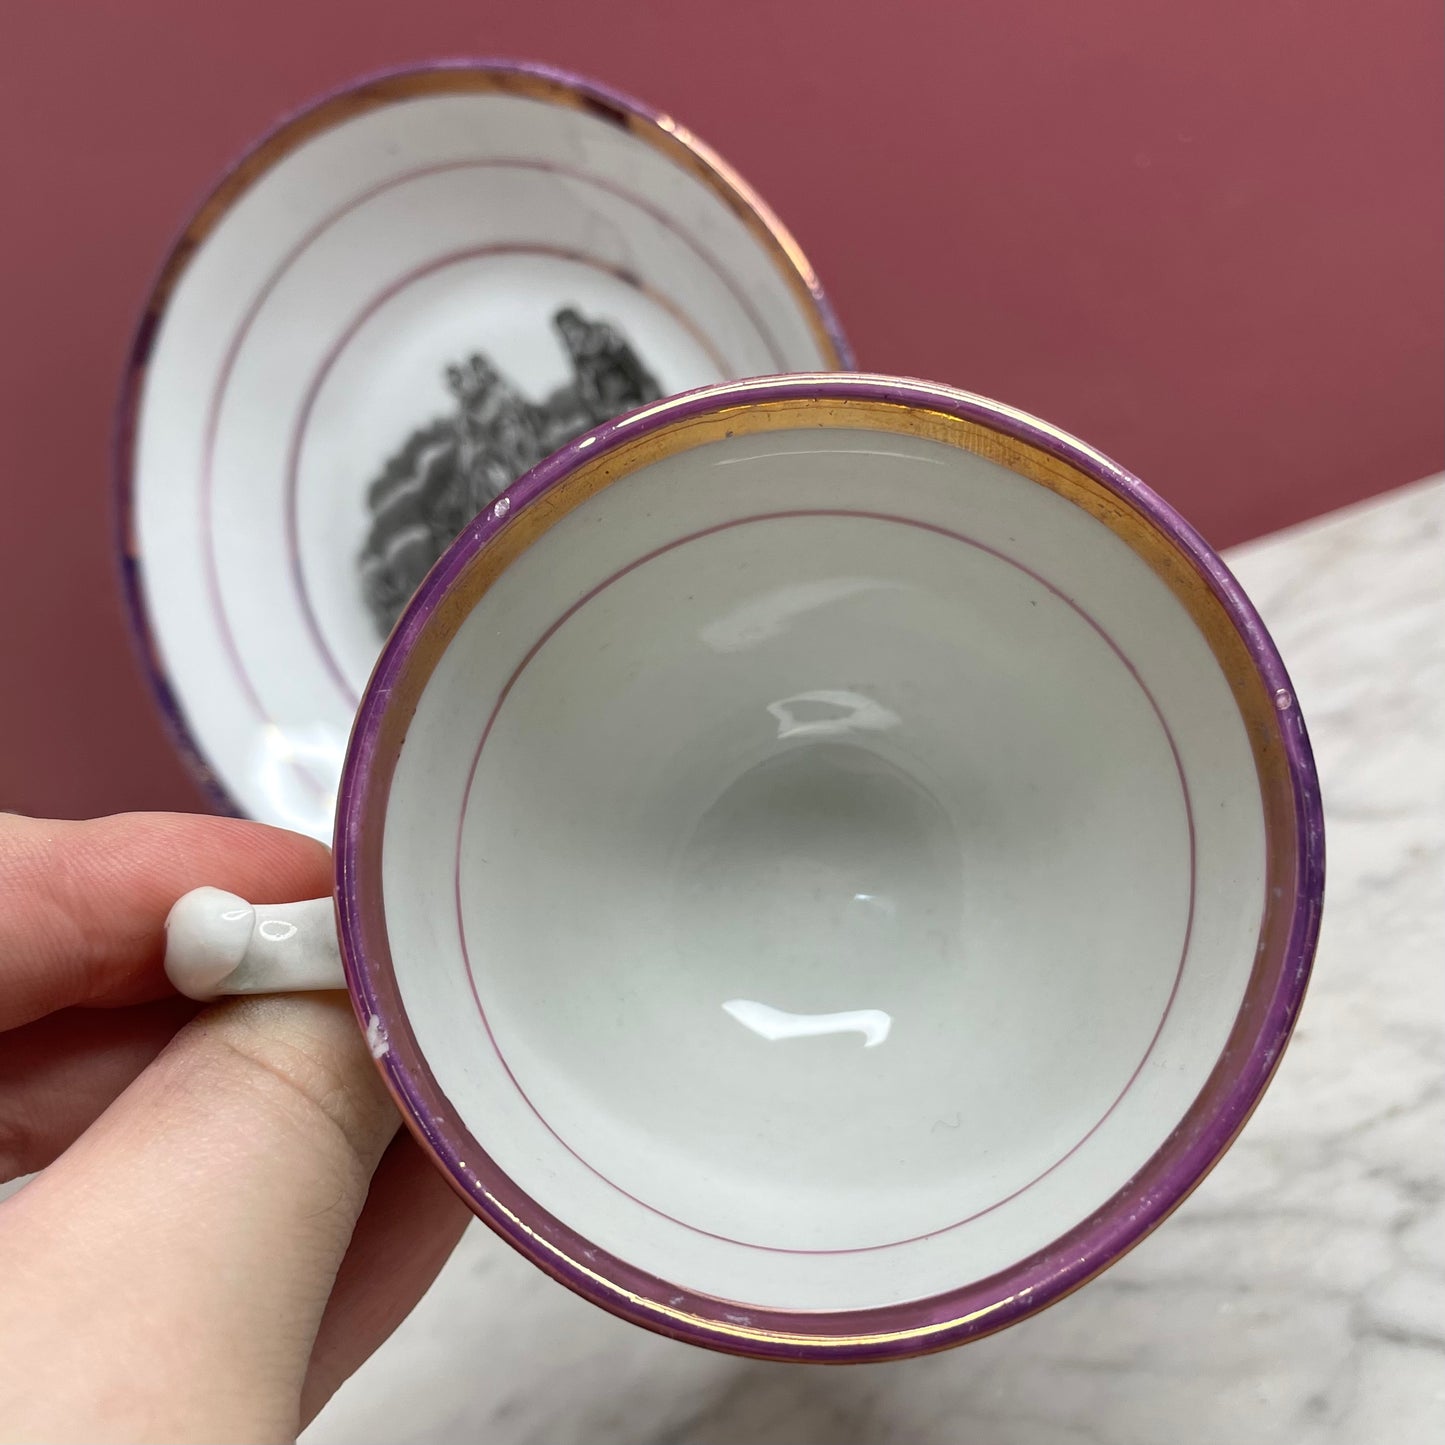 Early 19th c. Cup & Saucer with Unusual Classical Scene | Staffordshire with Pink Lustre